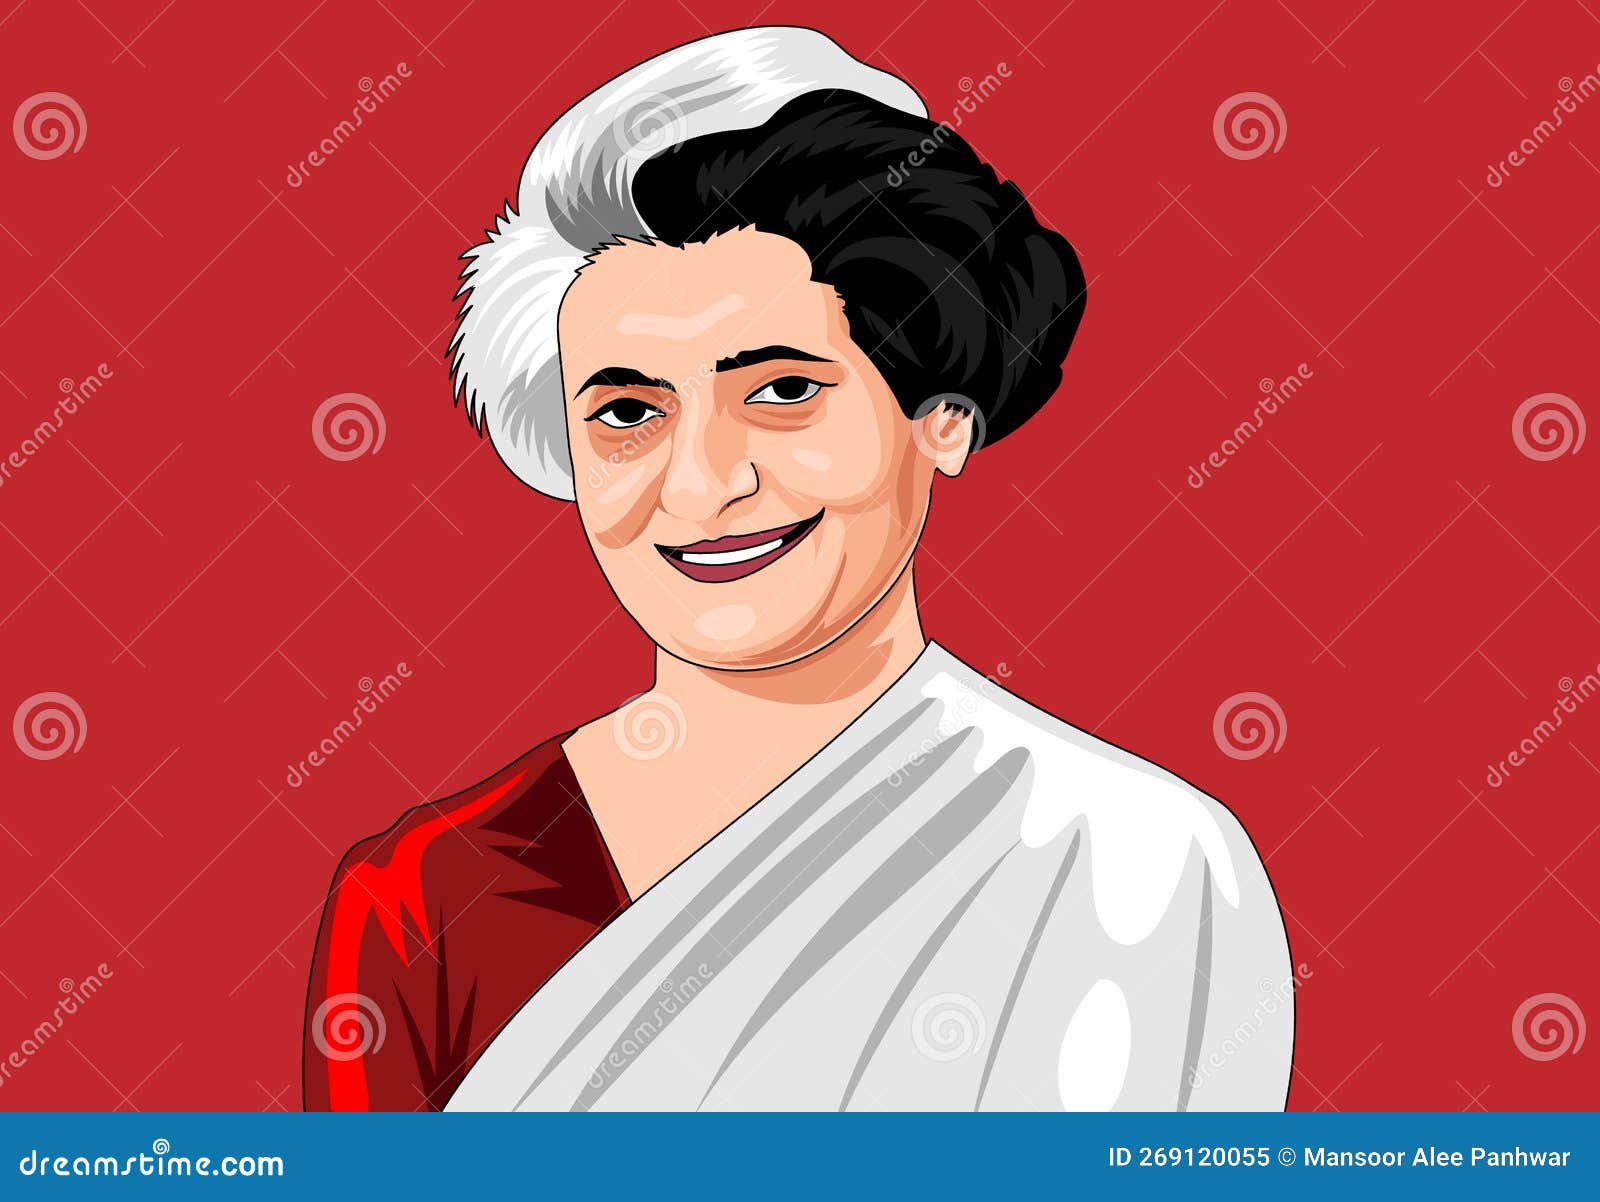 Indira Gandhi the famous Indian Politician in Pencil painting style   Behance